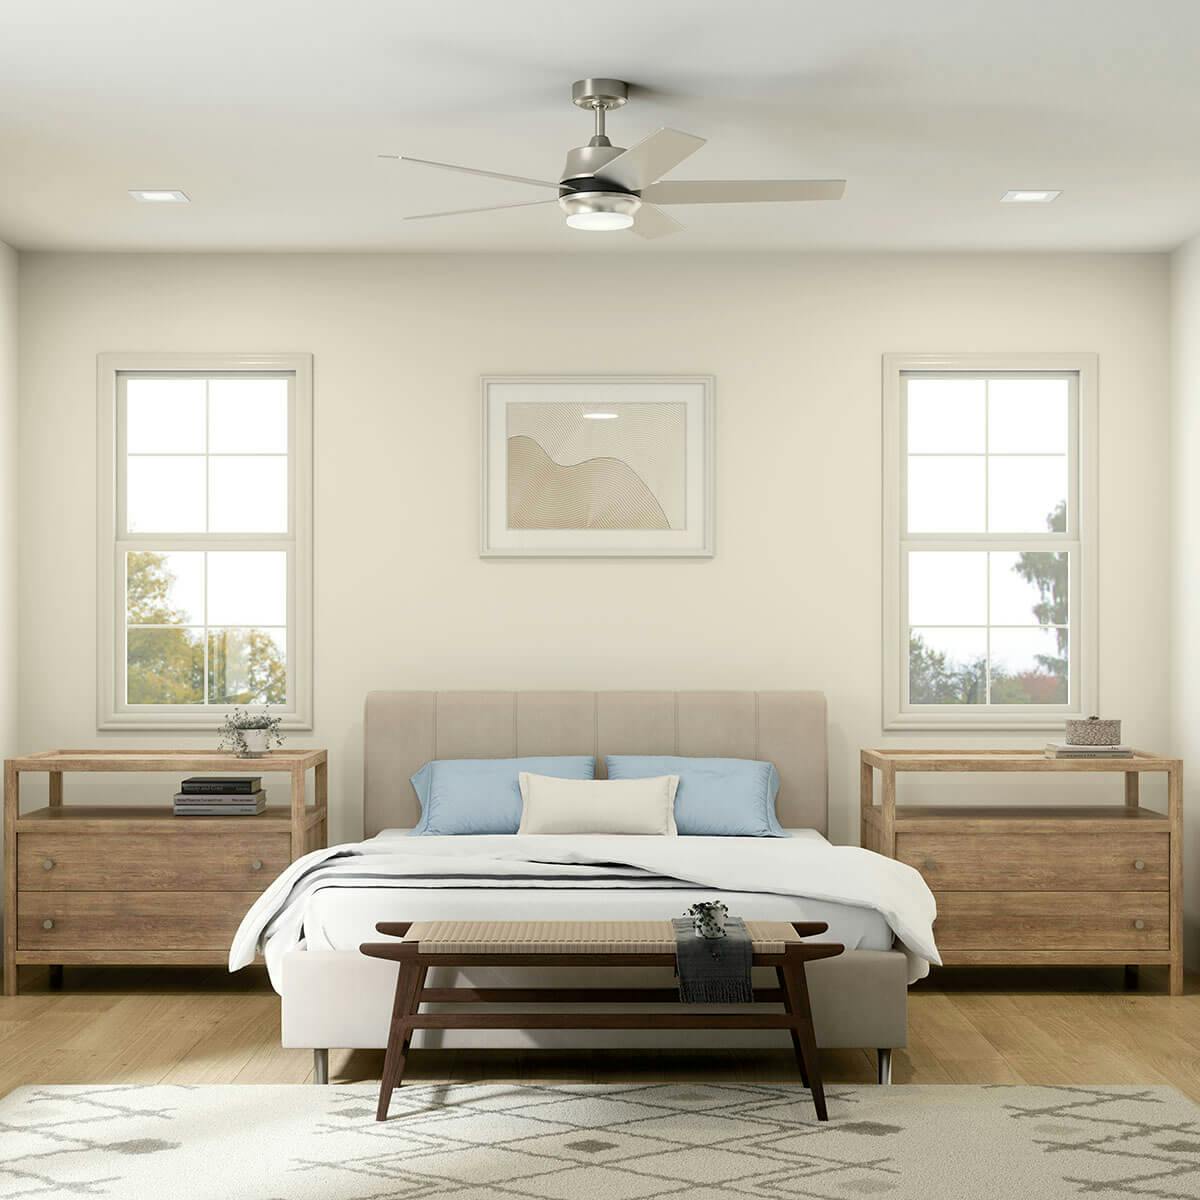 Day time bedroom image featuring Brahm ceiling fan 300059BSS